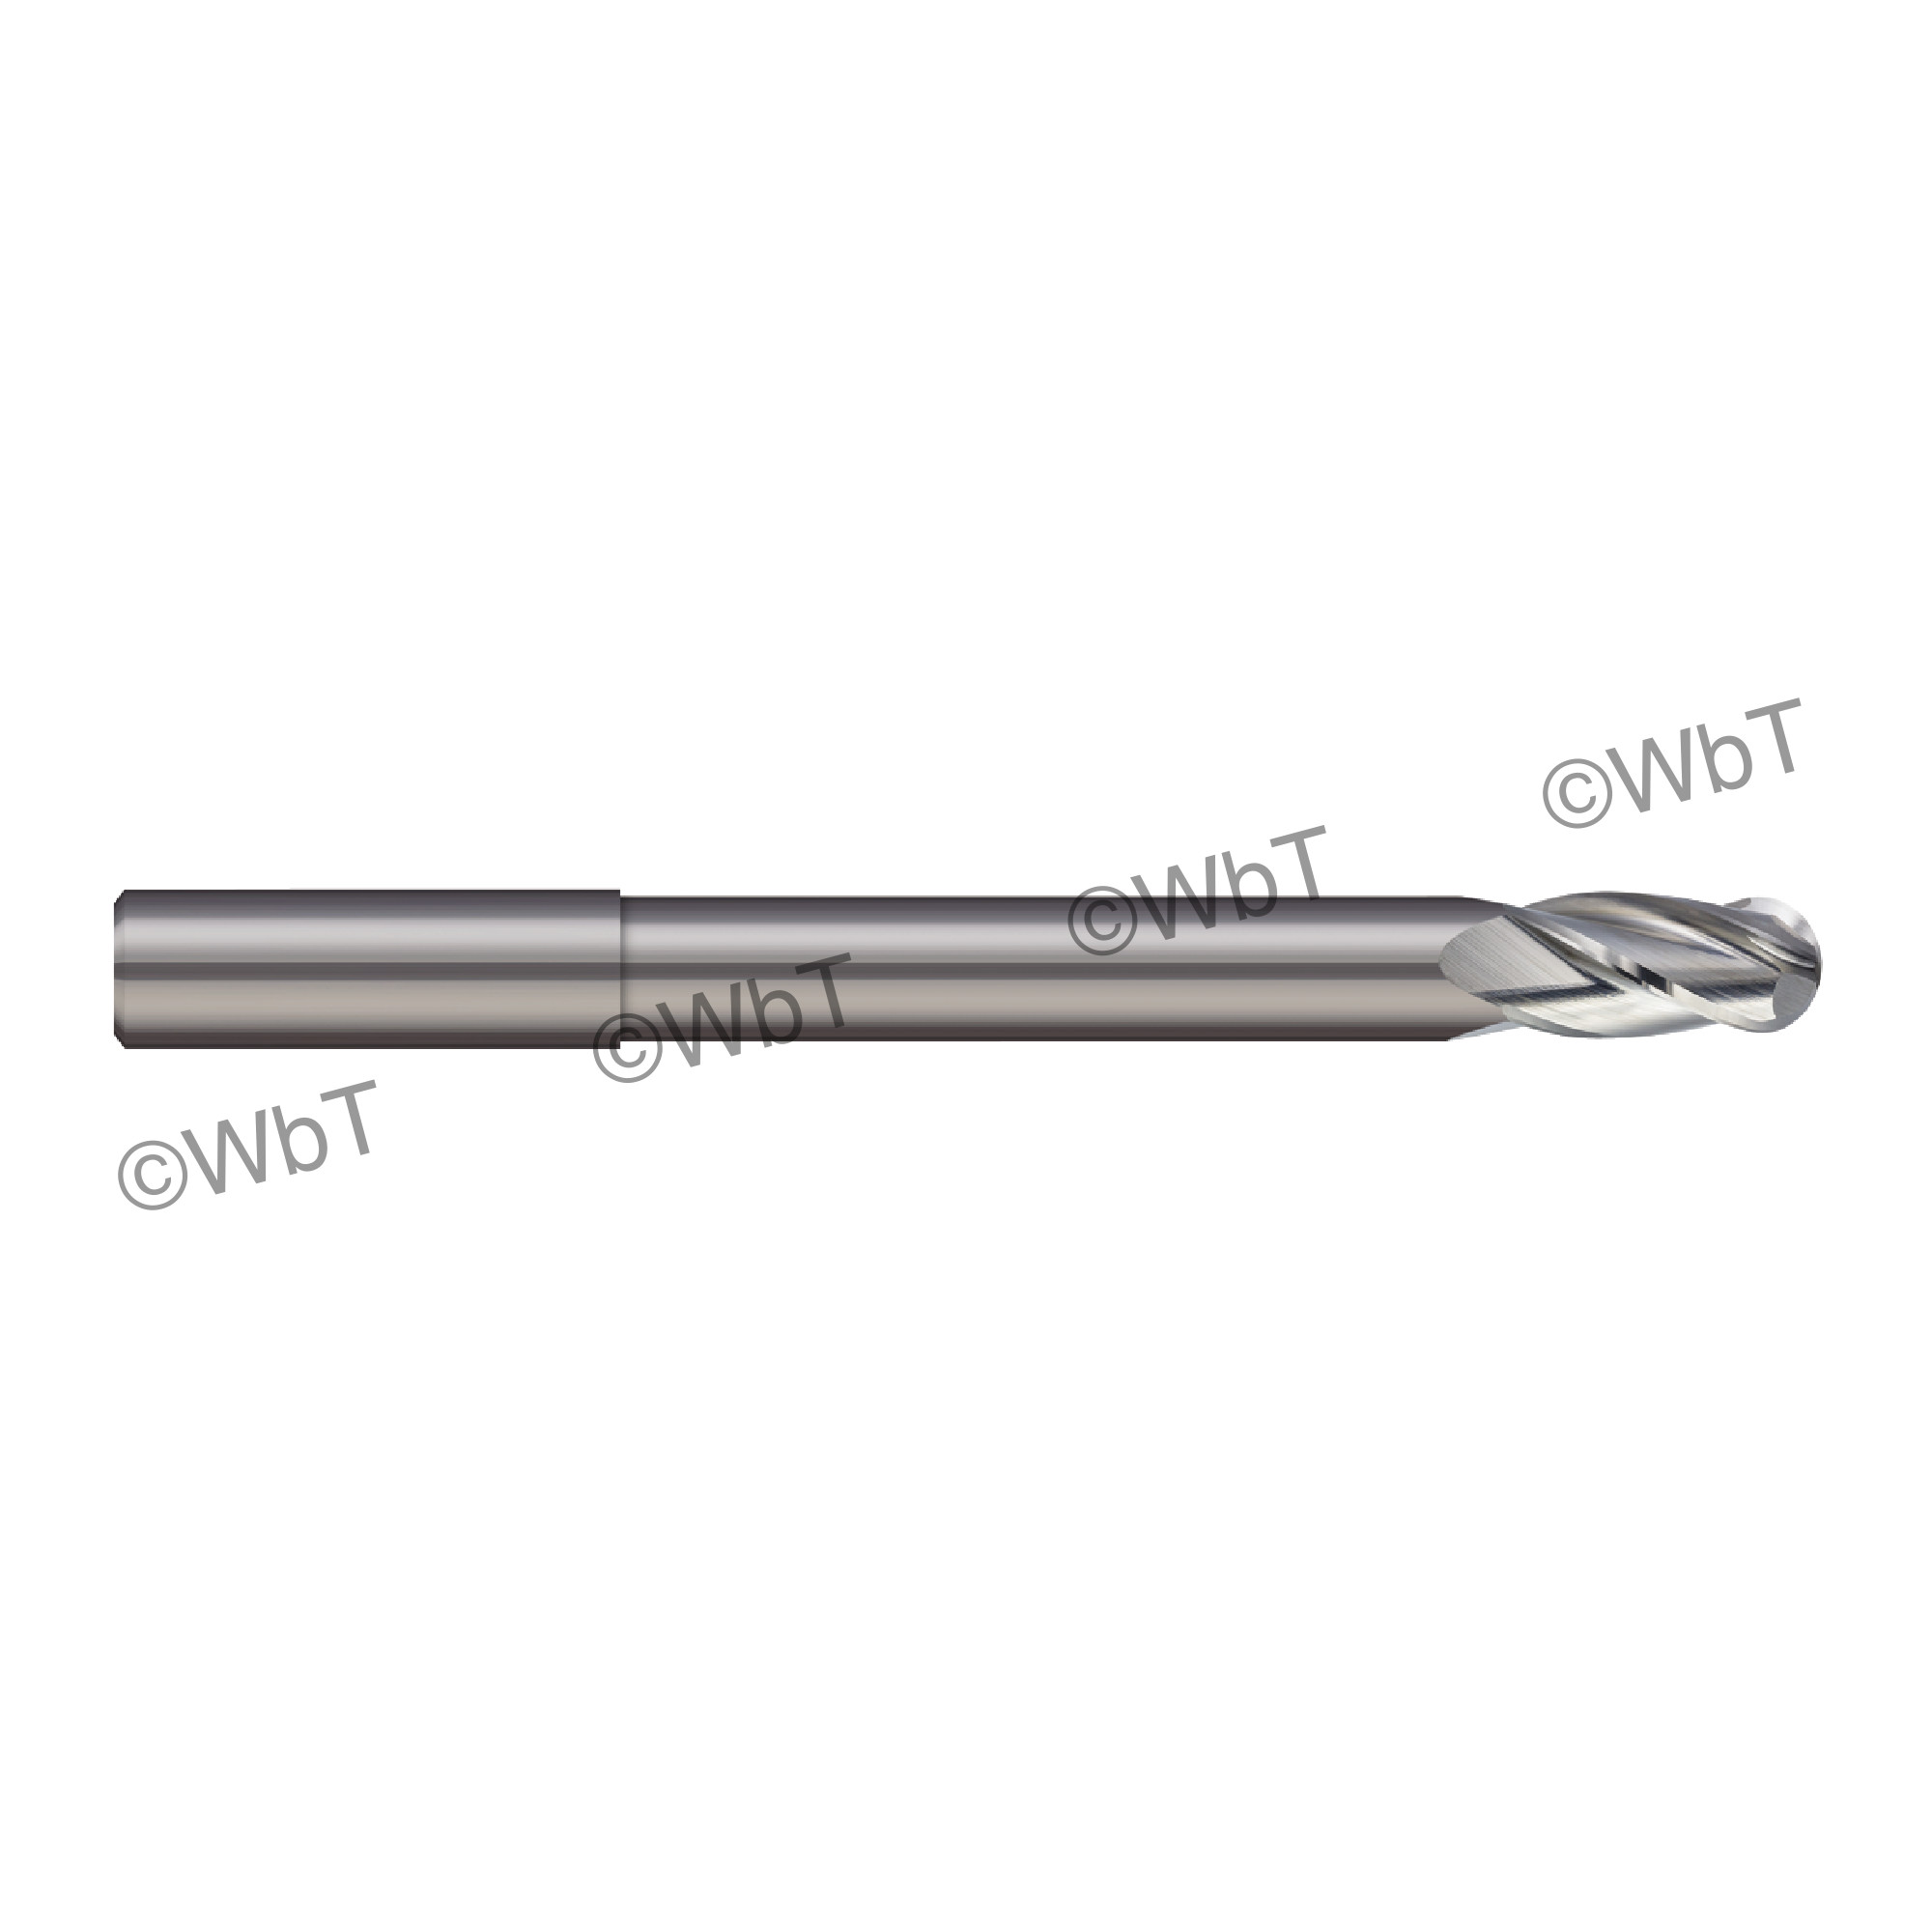 2 Flute Metric Solid Carbide Square End Extended Reach Ball End Mill